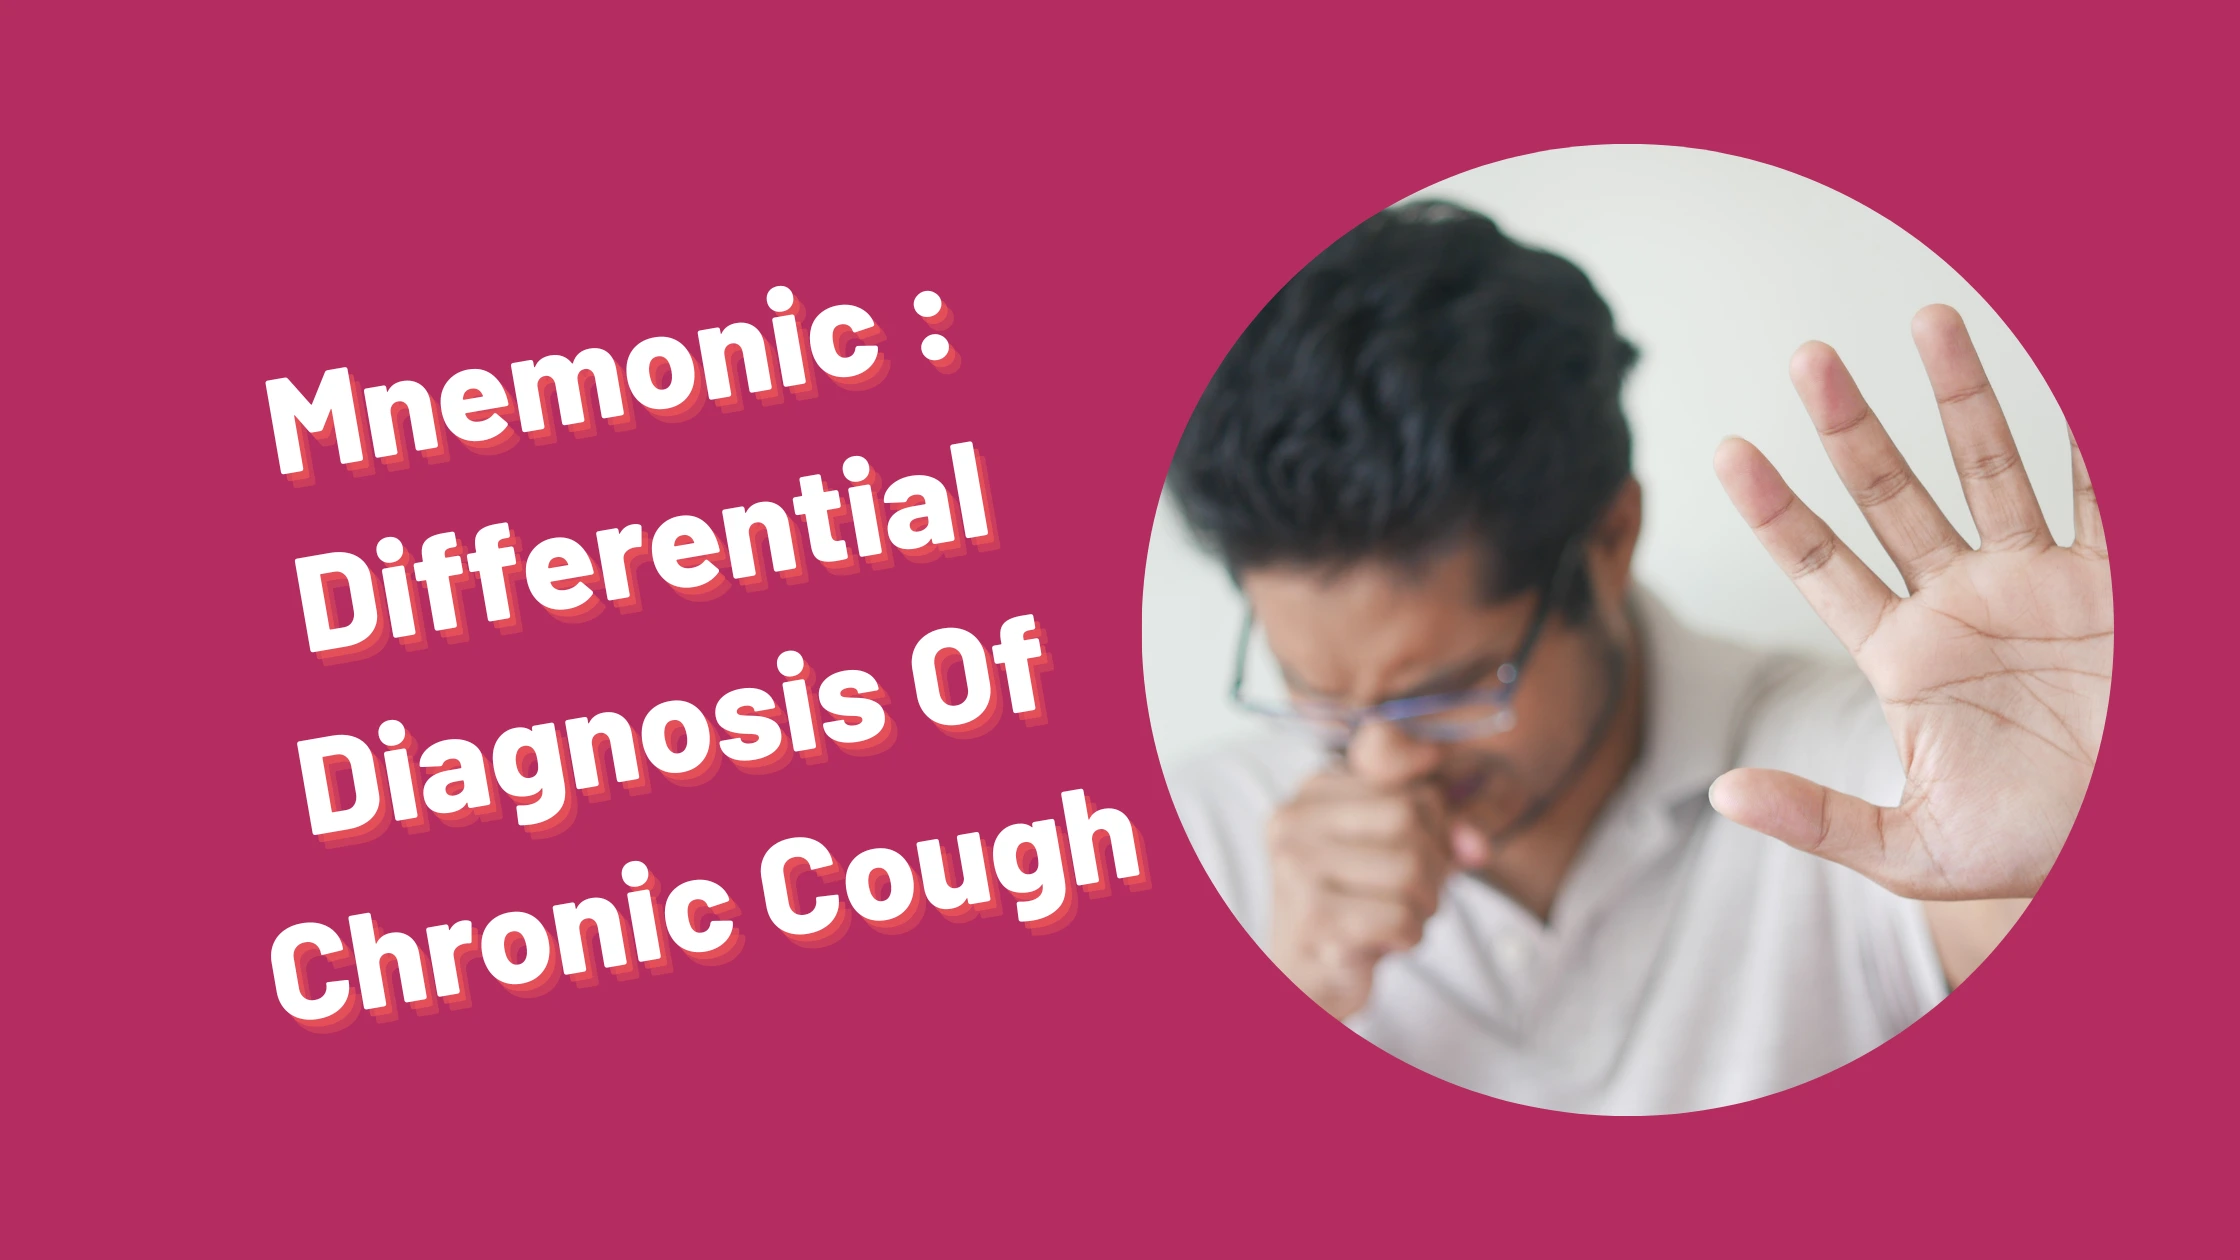 You are currently viewing [Very Cool] Mnemonic : Differential Diagnosis Of Chronic Cough